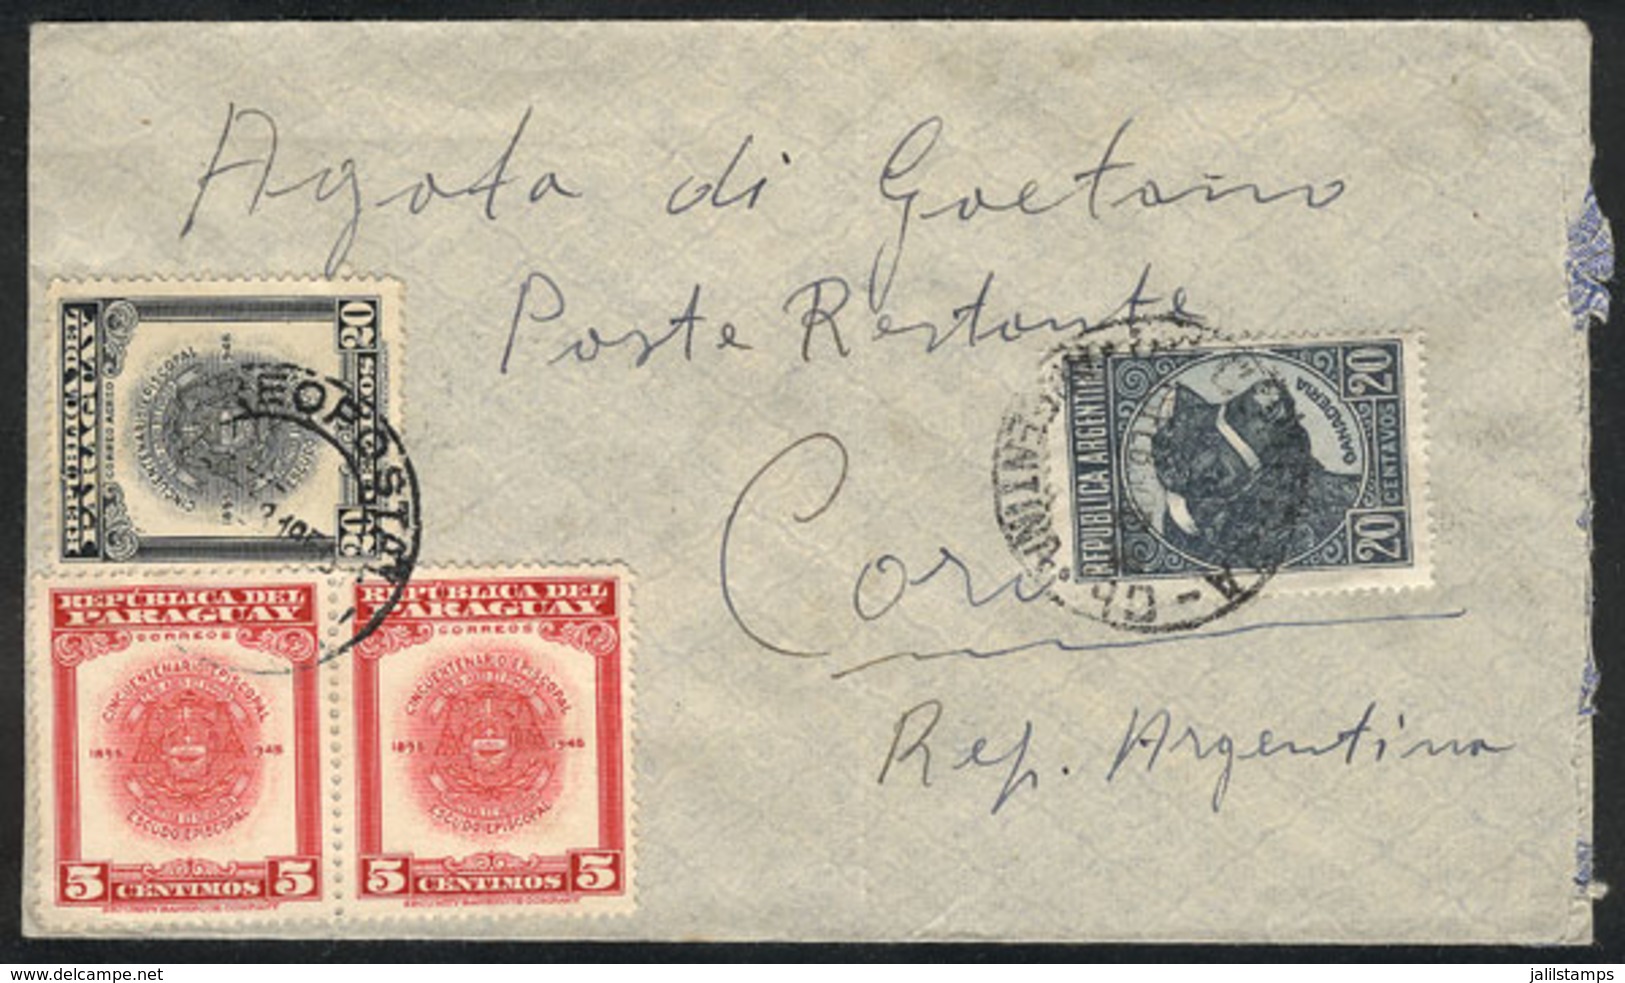 PARAGUAY: MIXED POSTAGE: Airmail Cover Sent To Argentina In FE/1950 Franked With 30c. + Argentina Stamp Of 20c. To Pay T - Paraguay